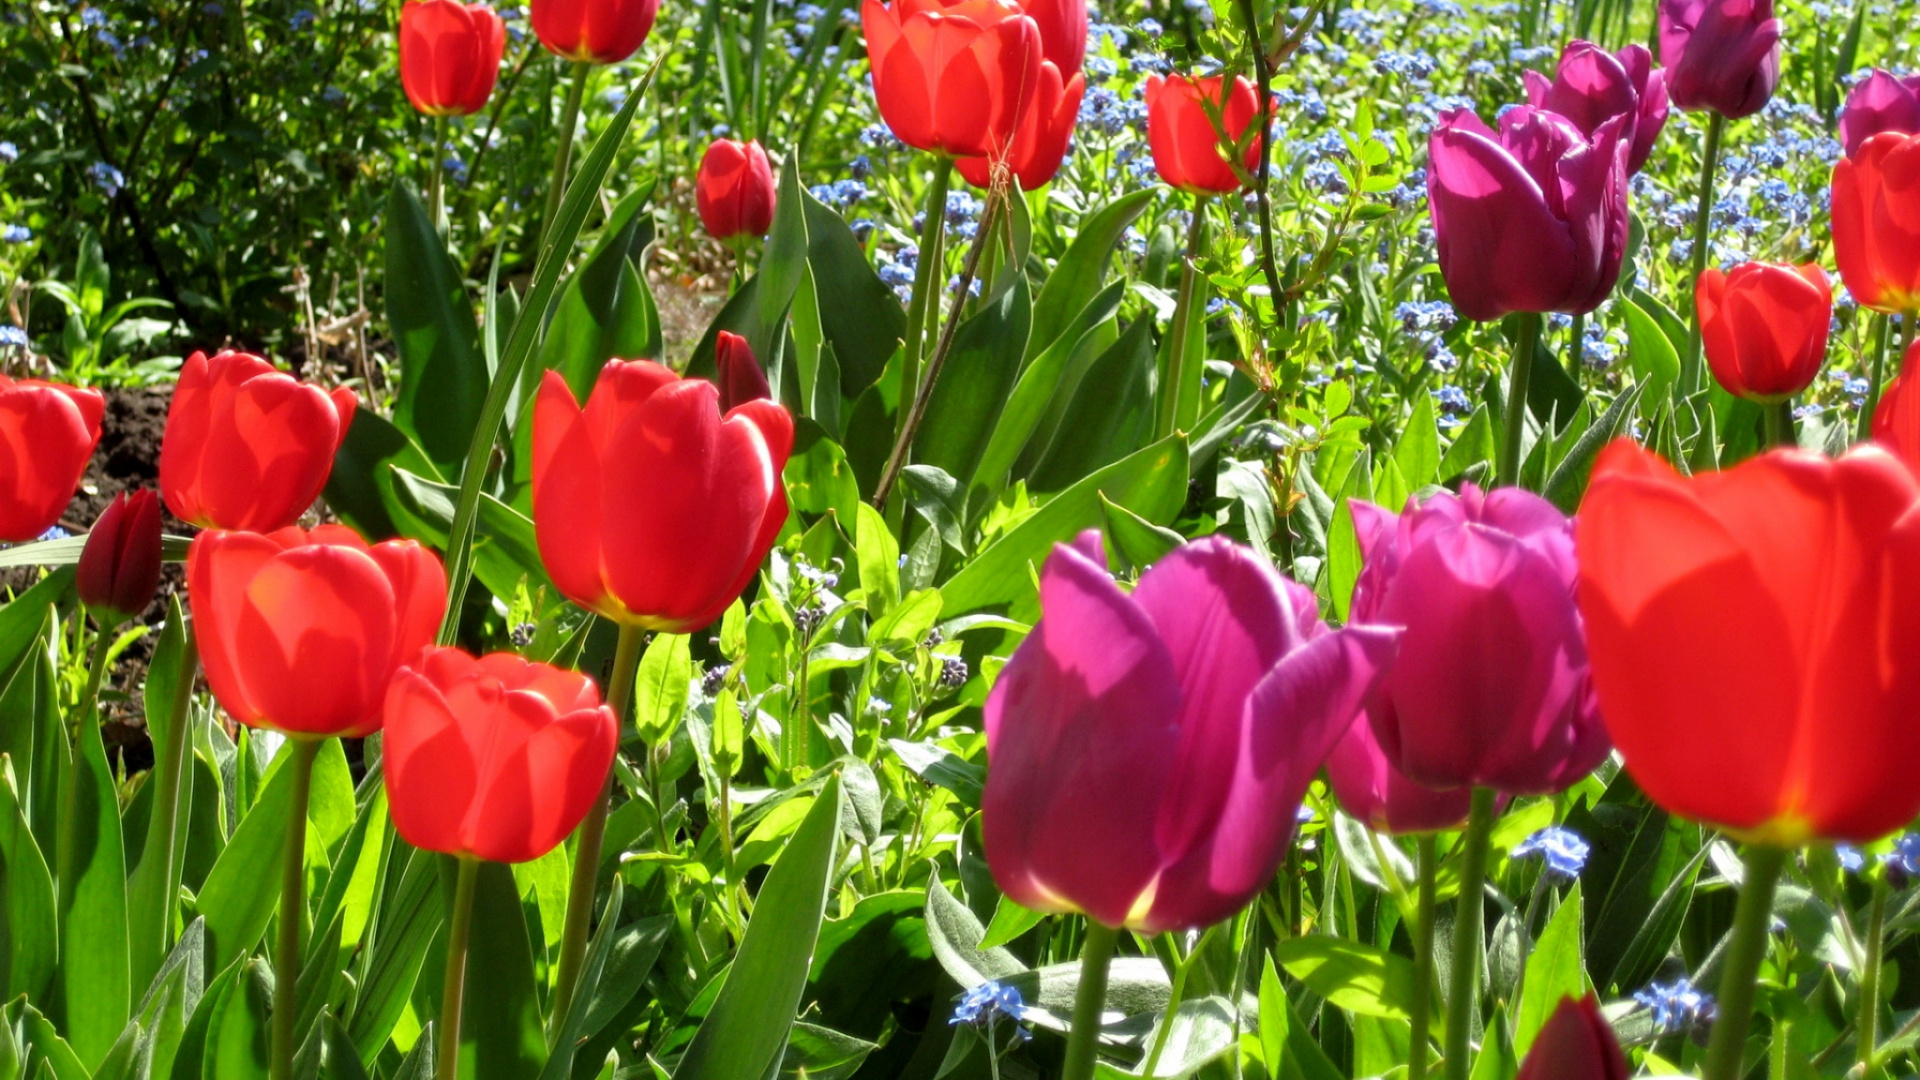 Red Tulips in Bloom During Daytime. Wallpaper in 1920x1080 Resolution